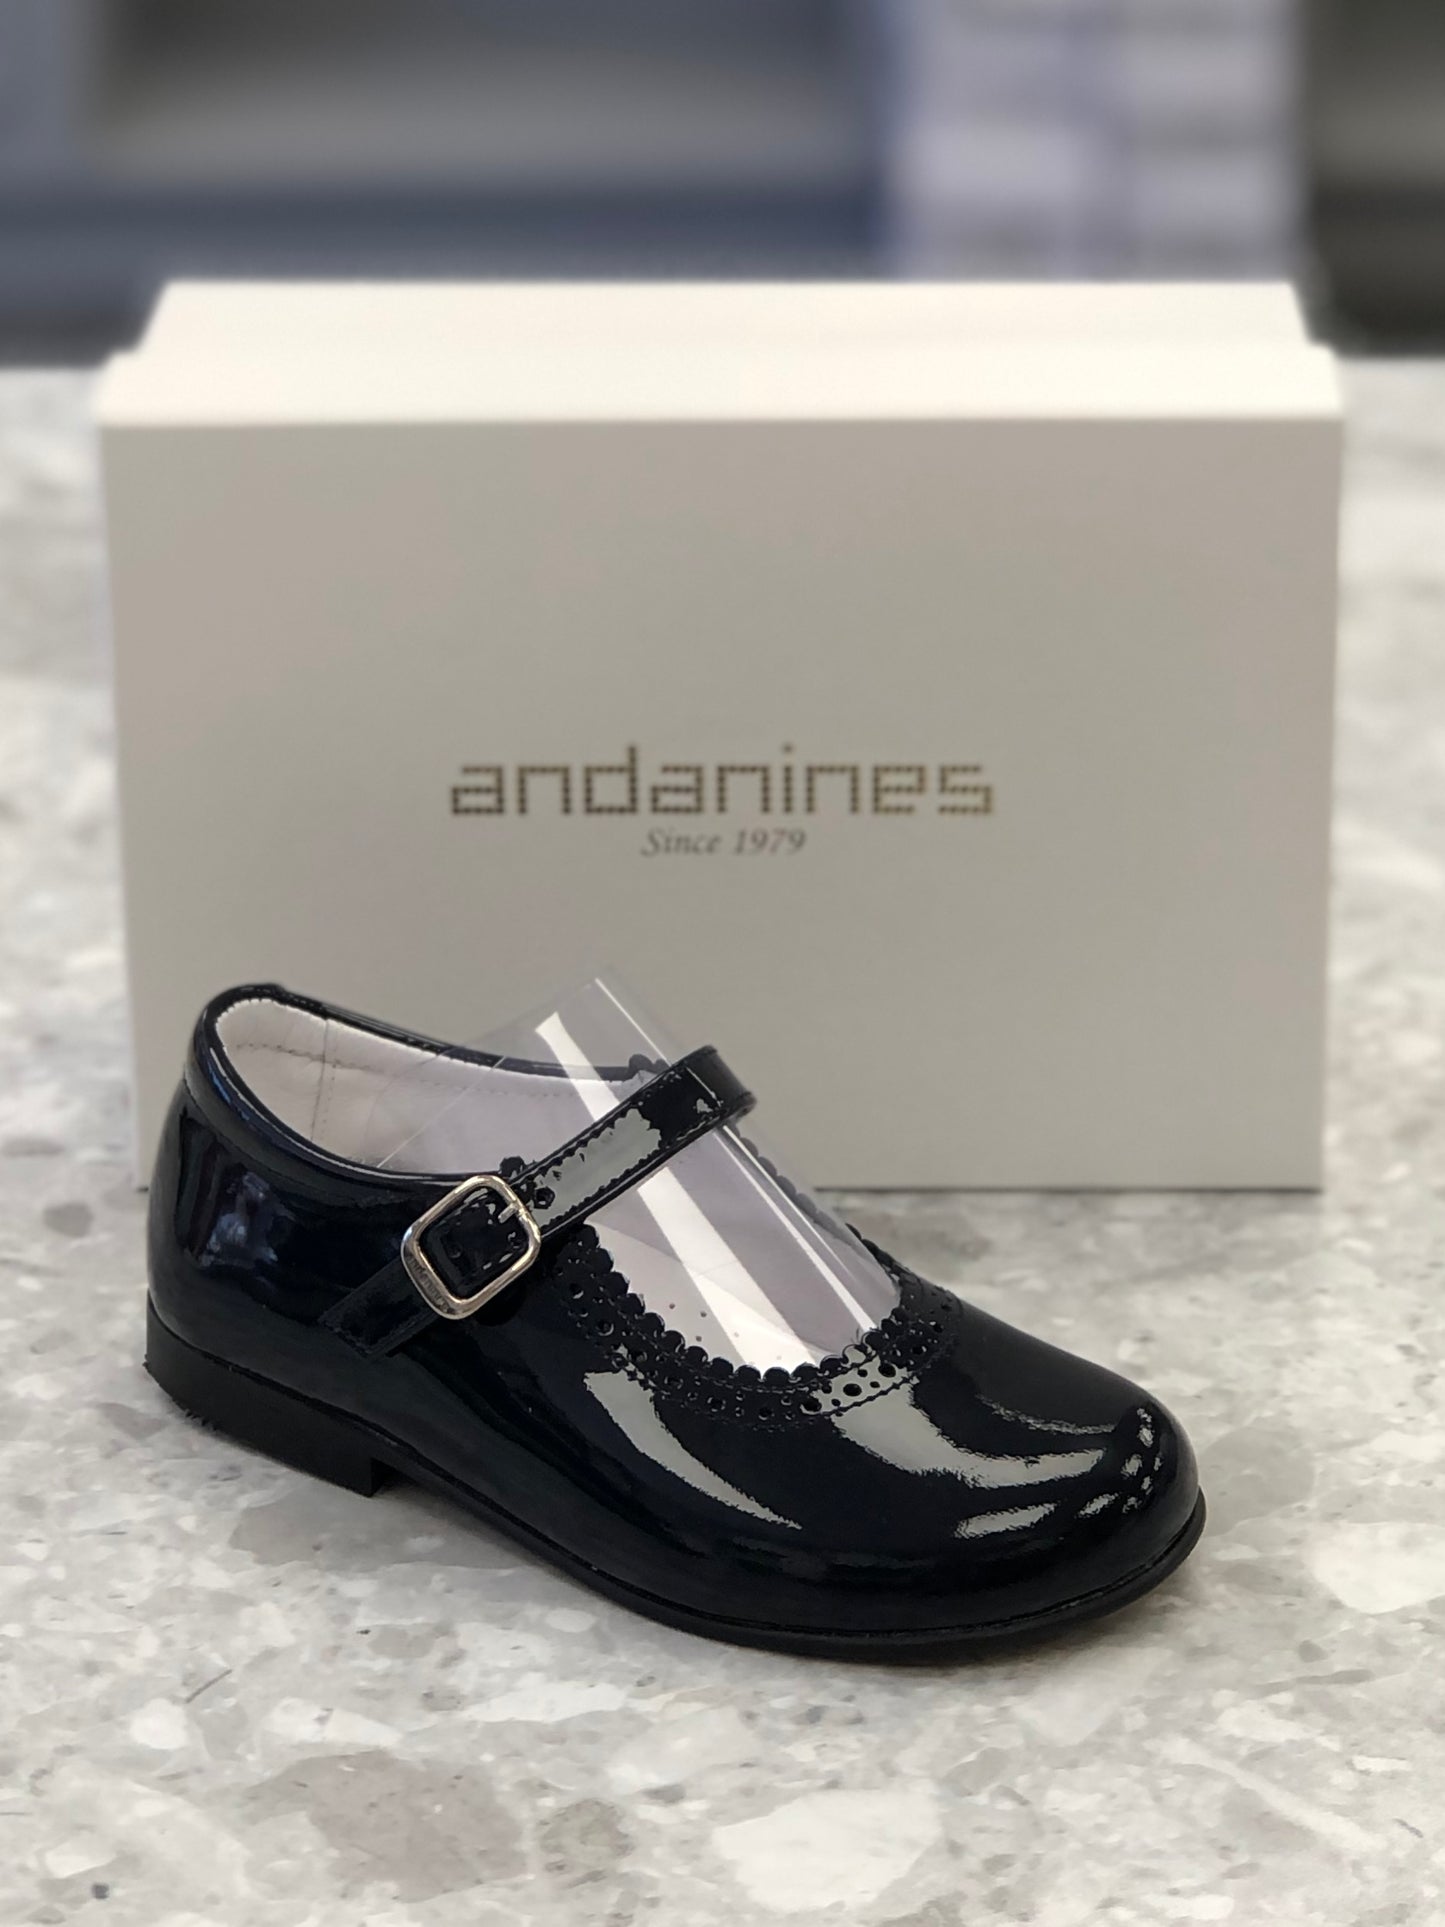 ANDANINES Navy Girls Patent Leather Mary Jane Shoe